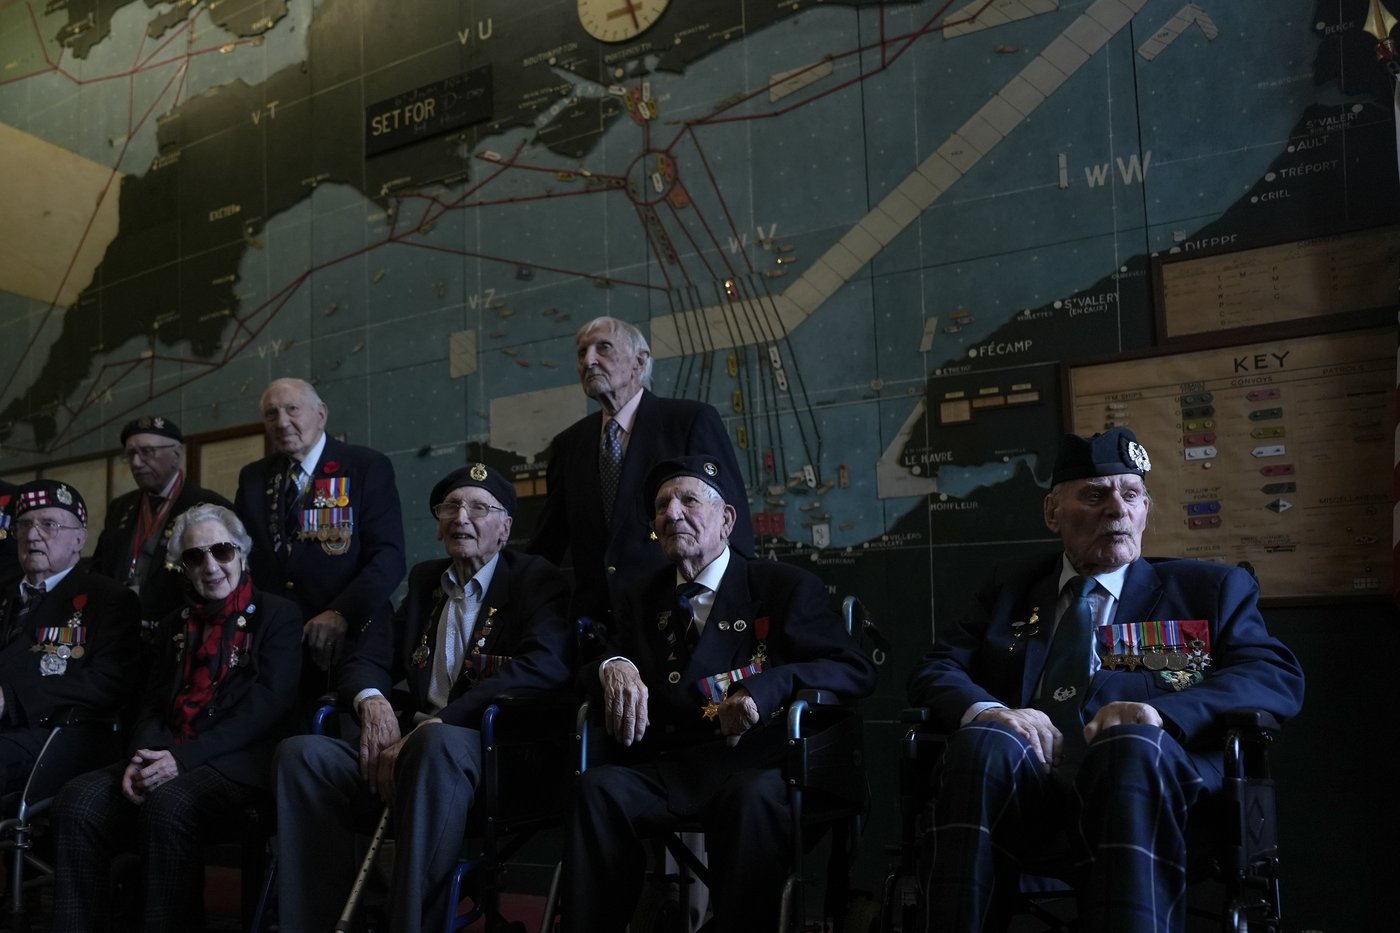 Remembering with sadness, the British DDay veterans recall the war